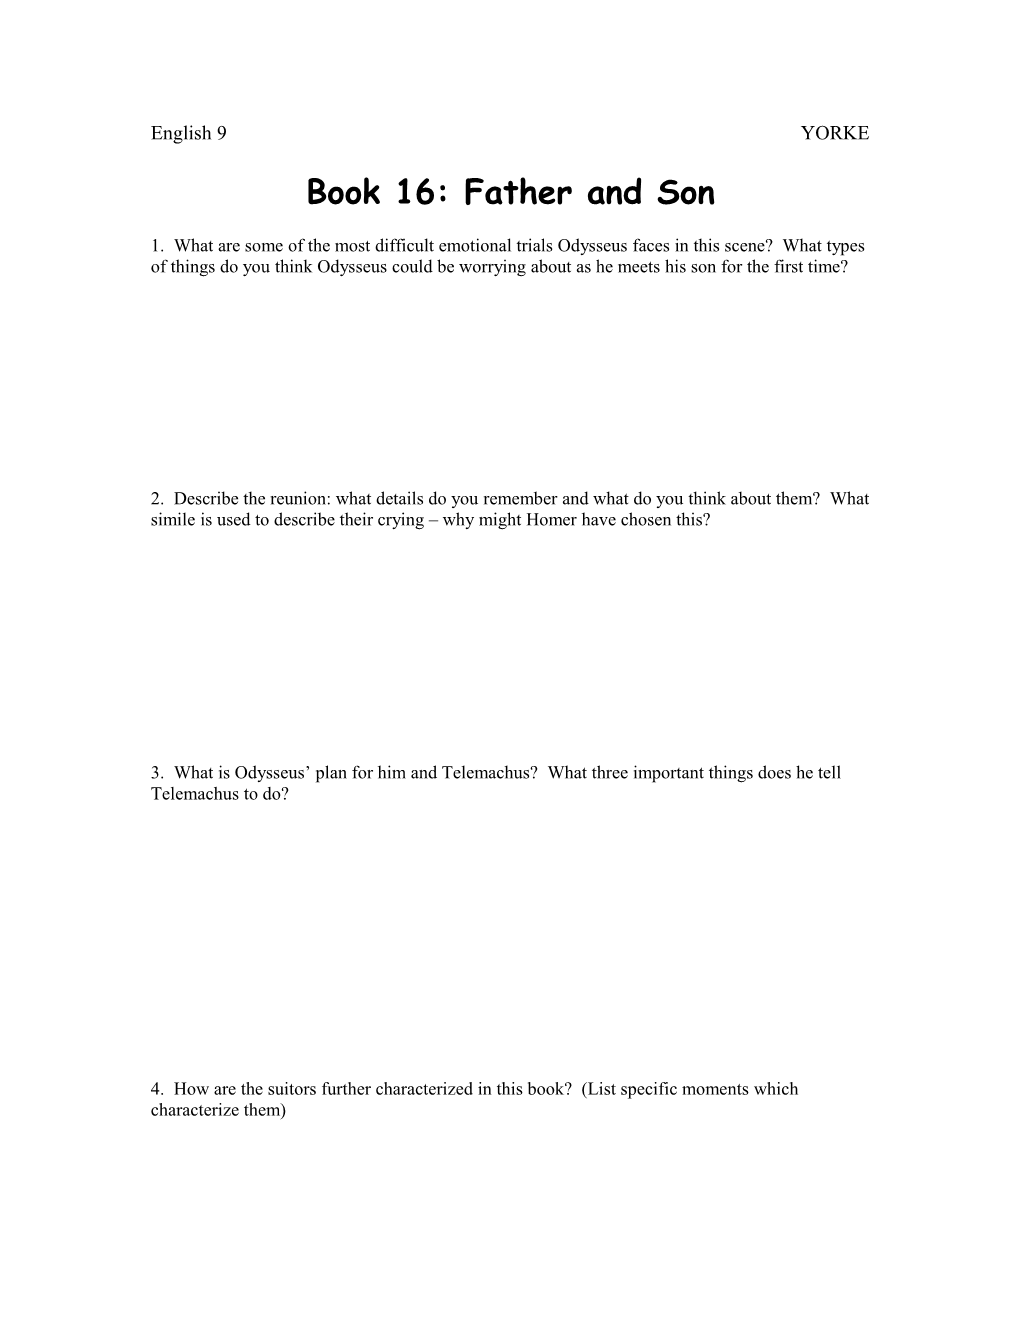 Book 16: Father and Son